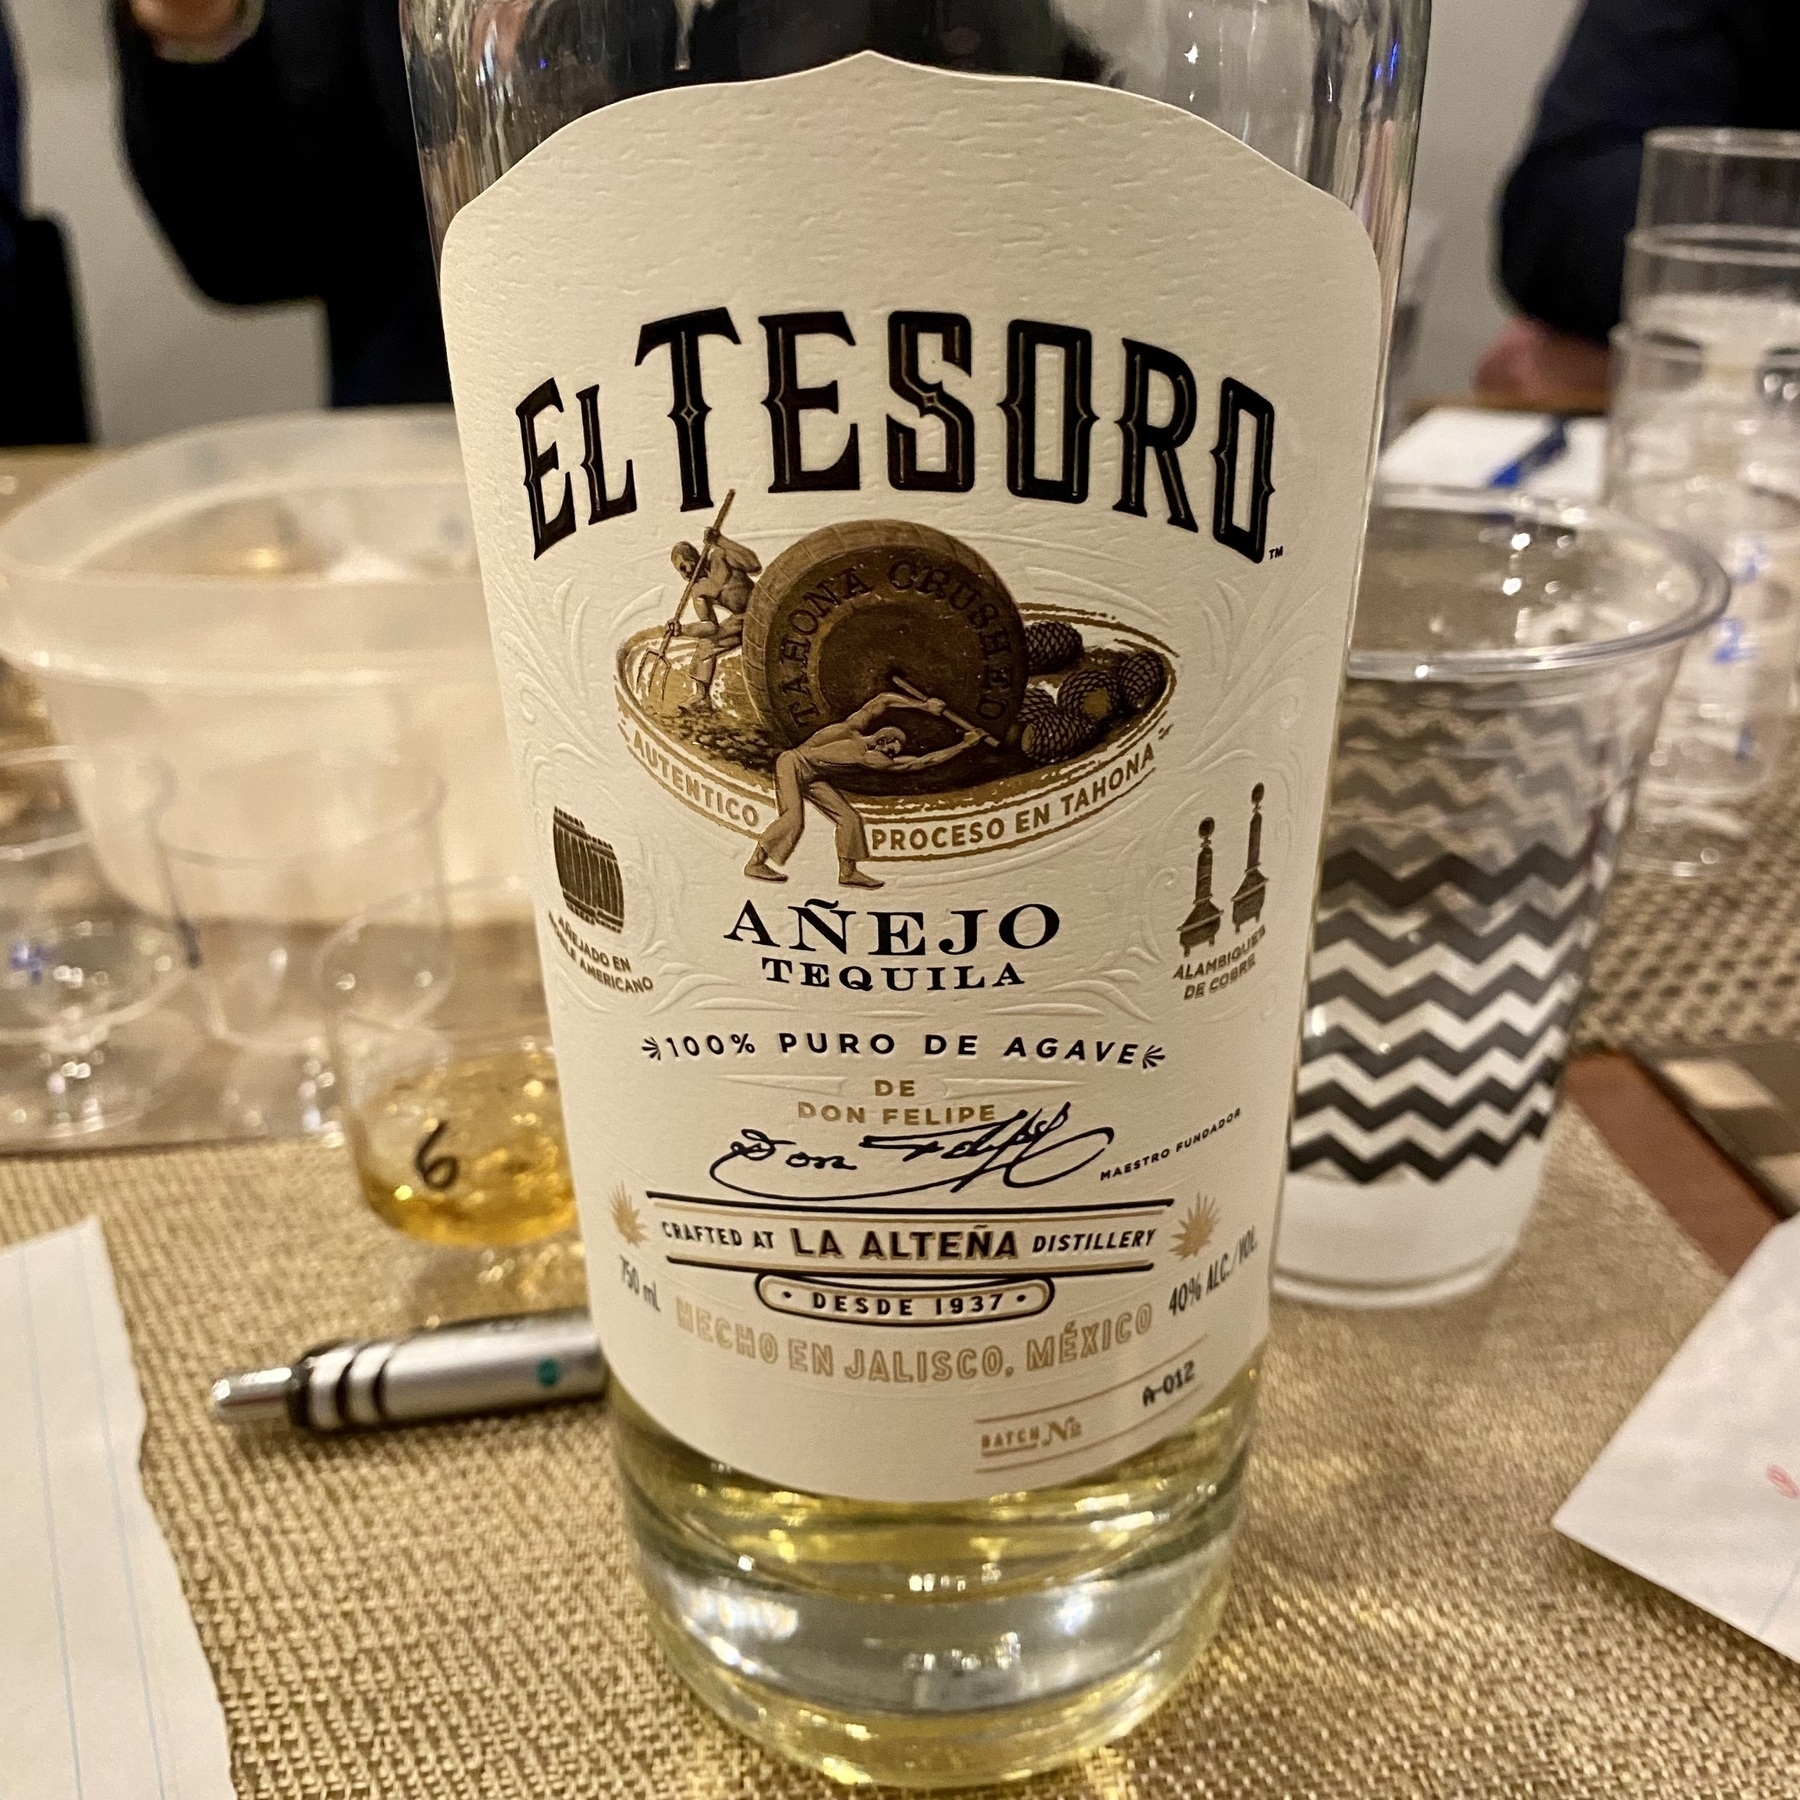 A bottle of “El Tesoro Añejo Tequila” sits on a table, featuring labels with text indicating a traditional process and a crafted distillery background.